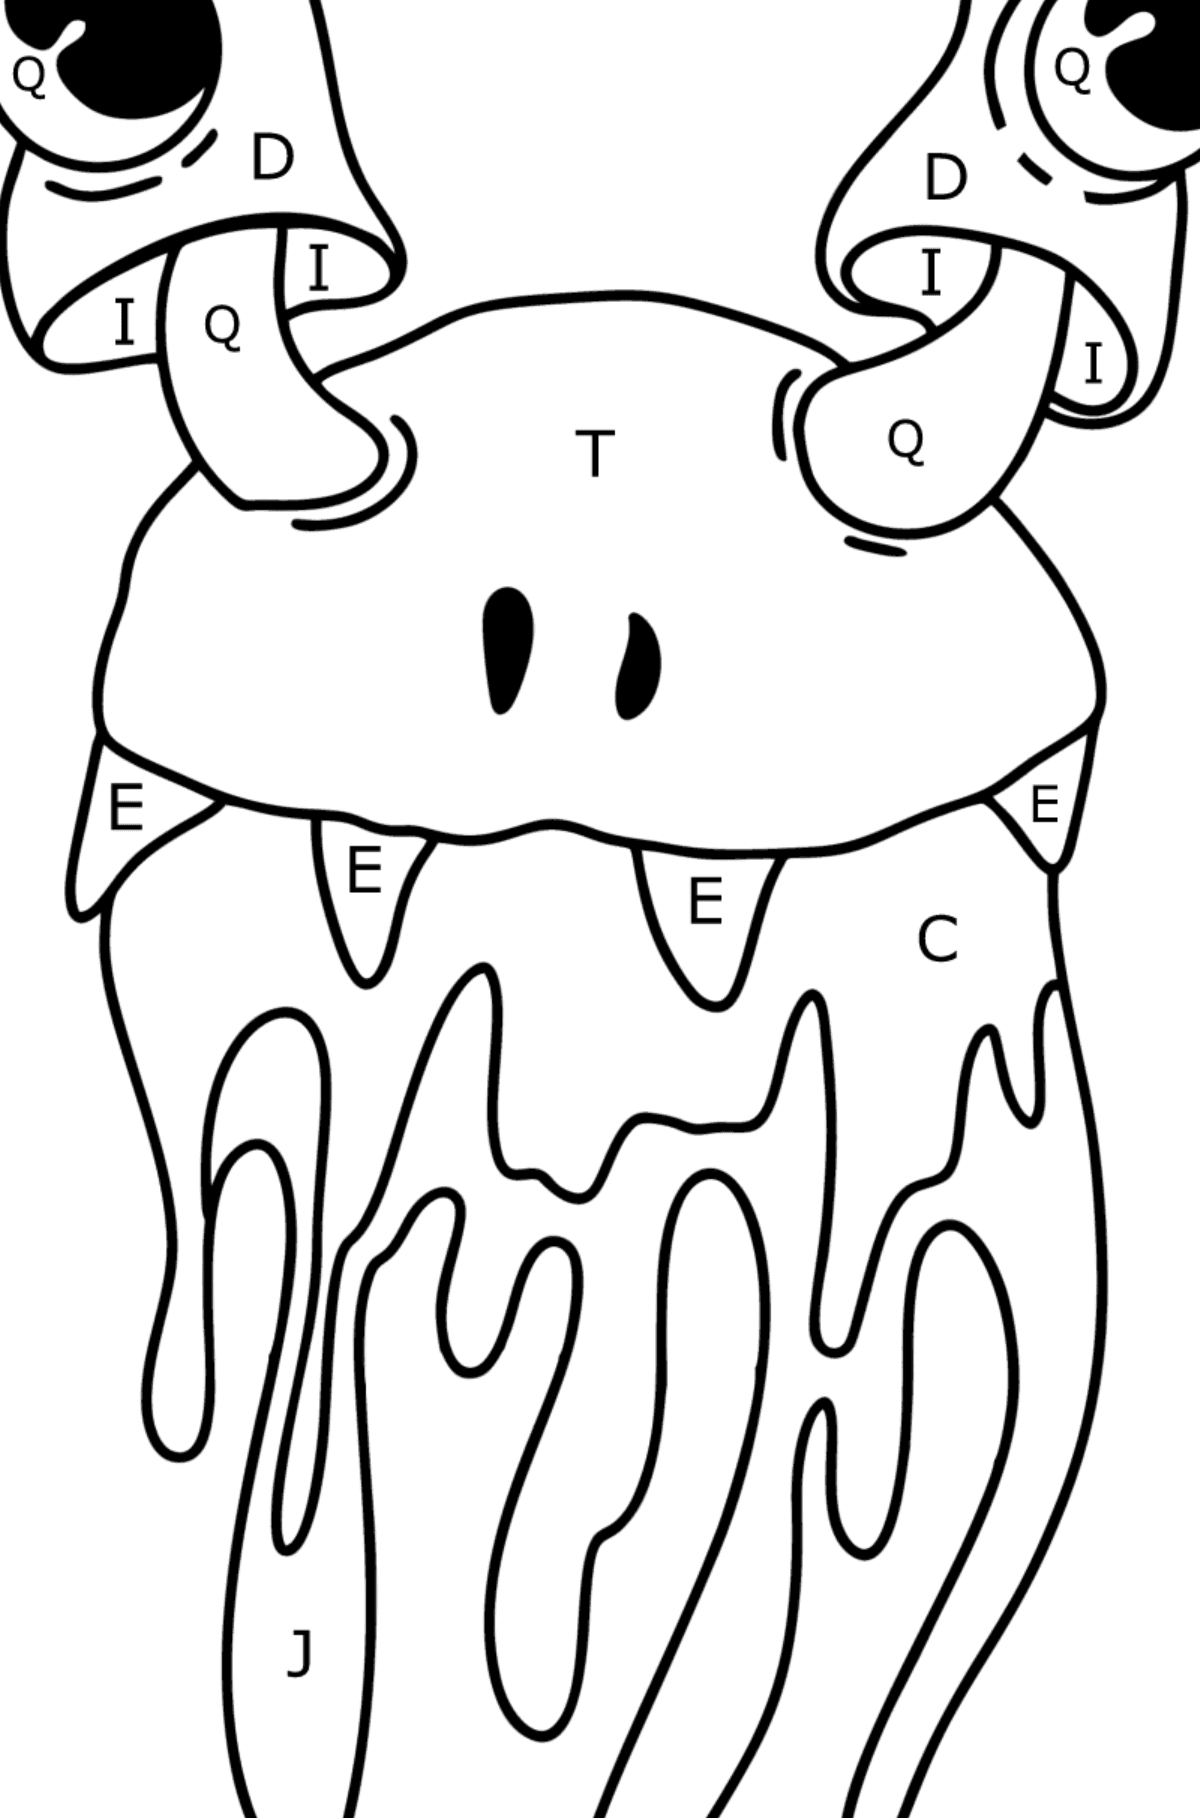 Cartoon monster face coloring page - Coloring by Letters for Kids